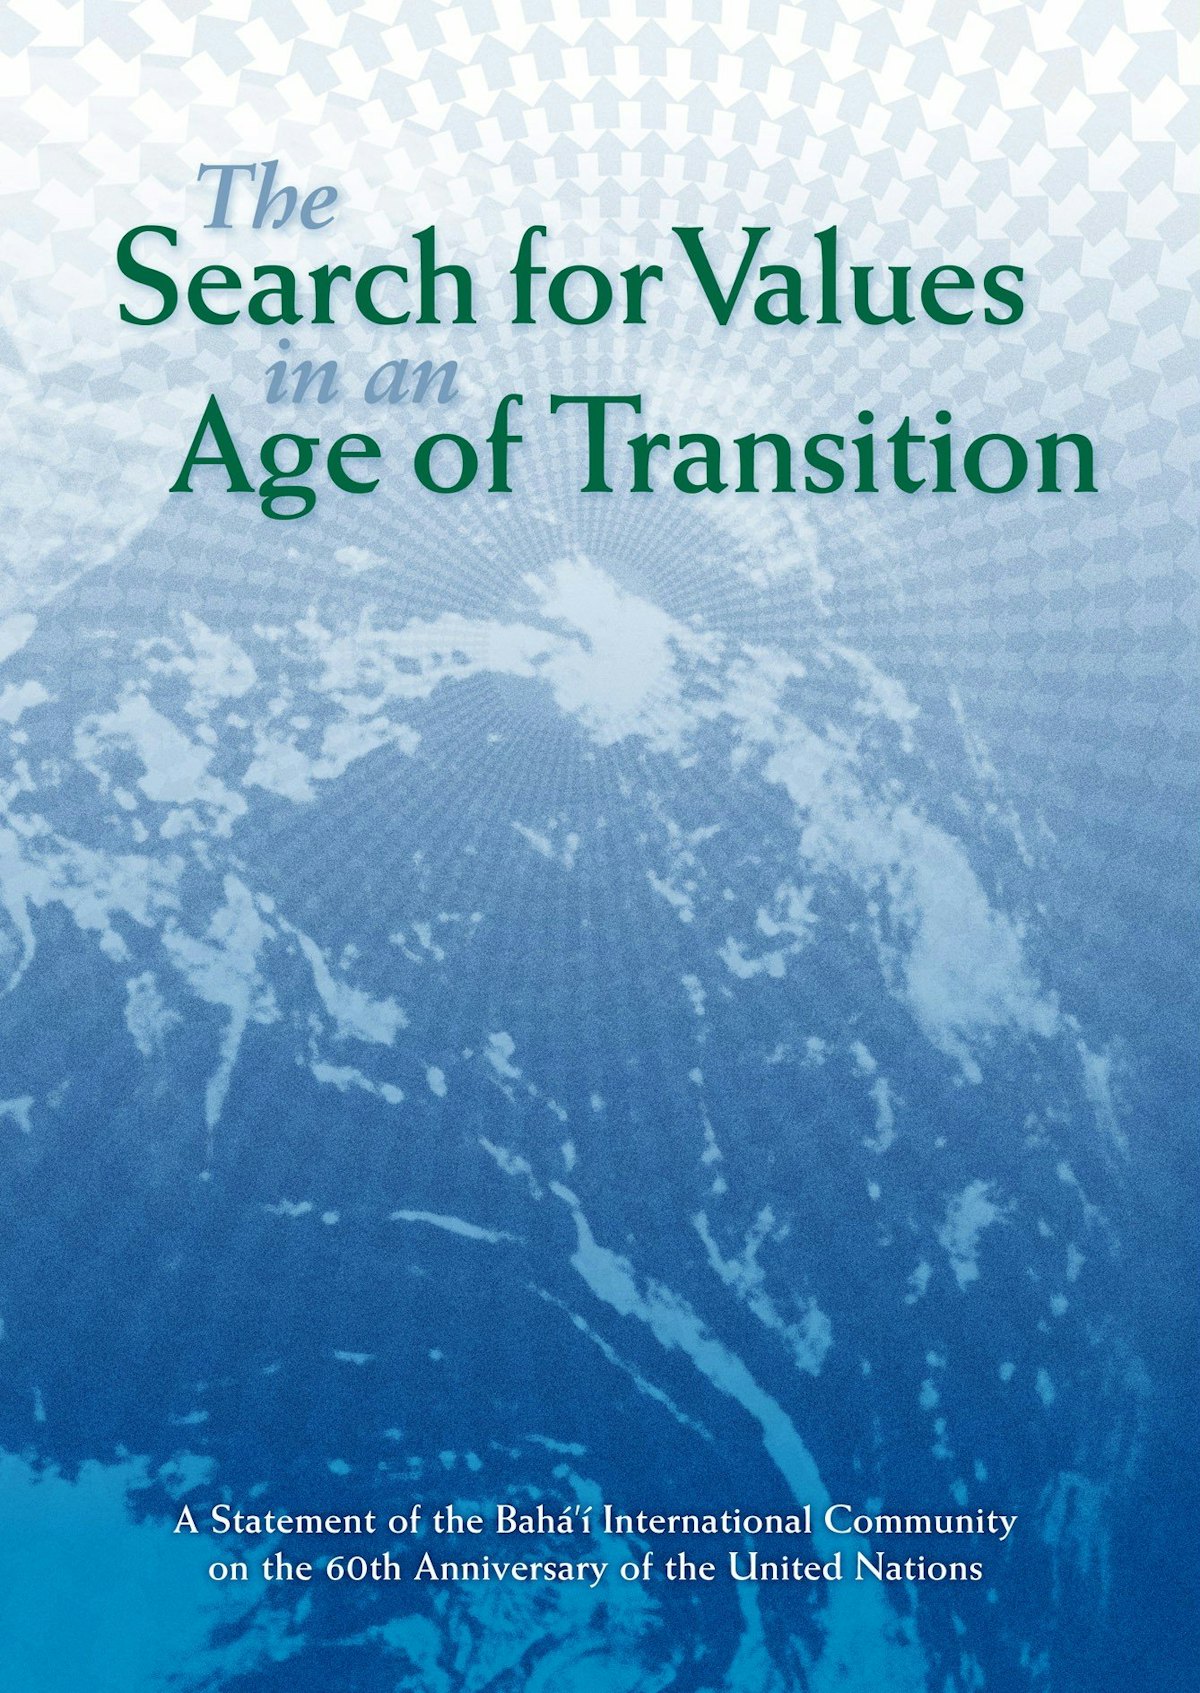 Cover of the newly released Baha'i International Community statement, "The Search for Values in an Age of Transition," issued for the 60th anniversary of the founding of the United Nations.